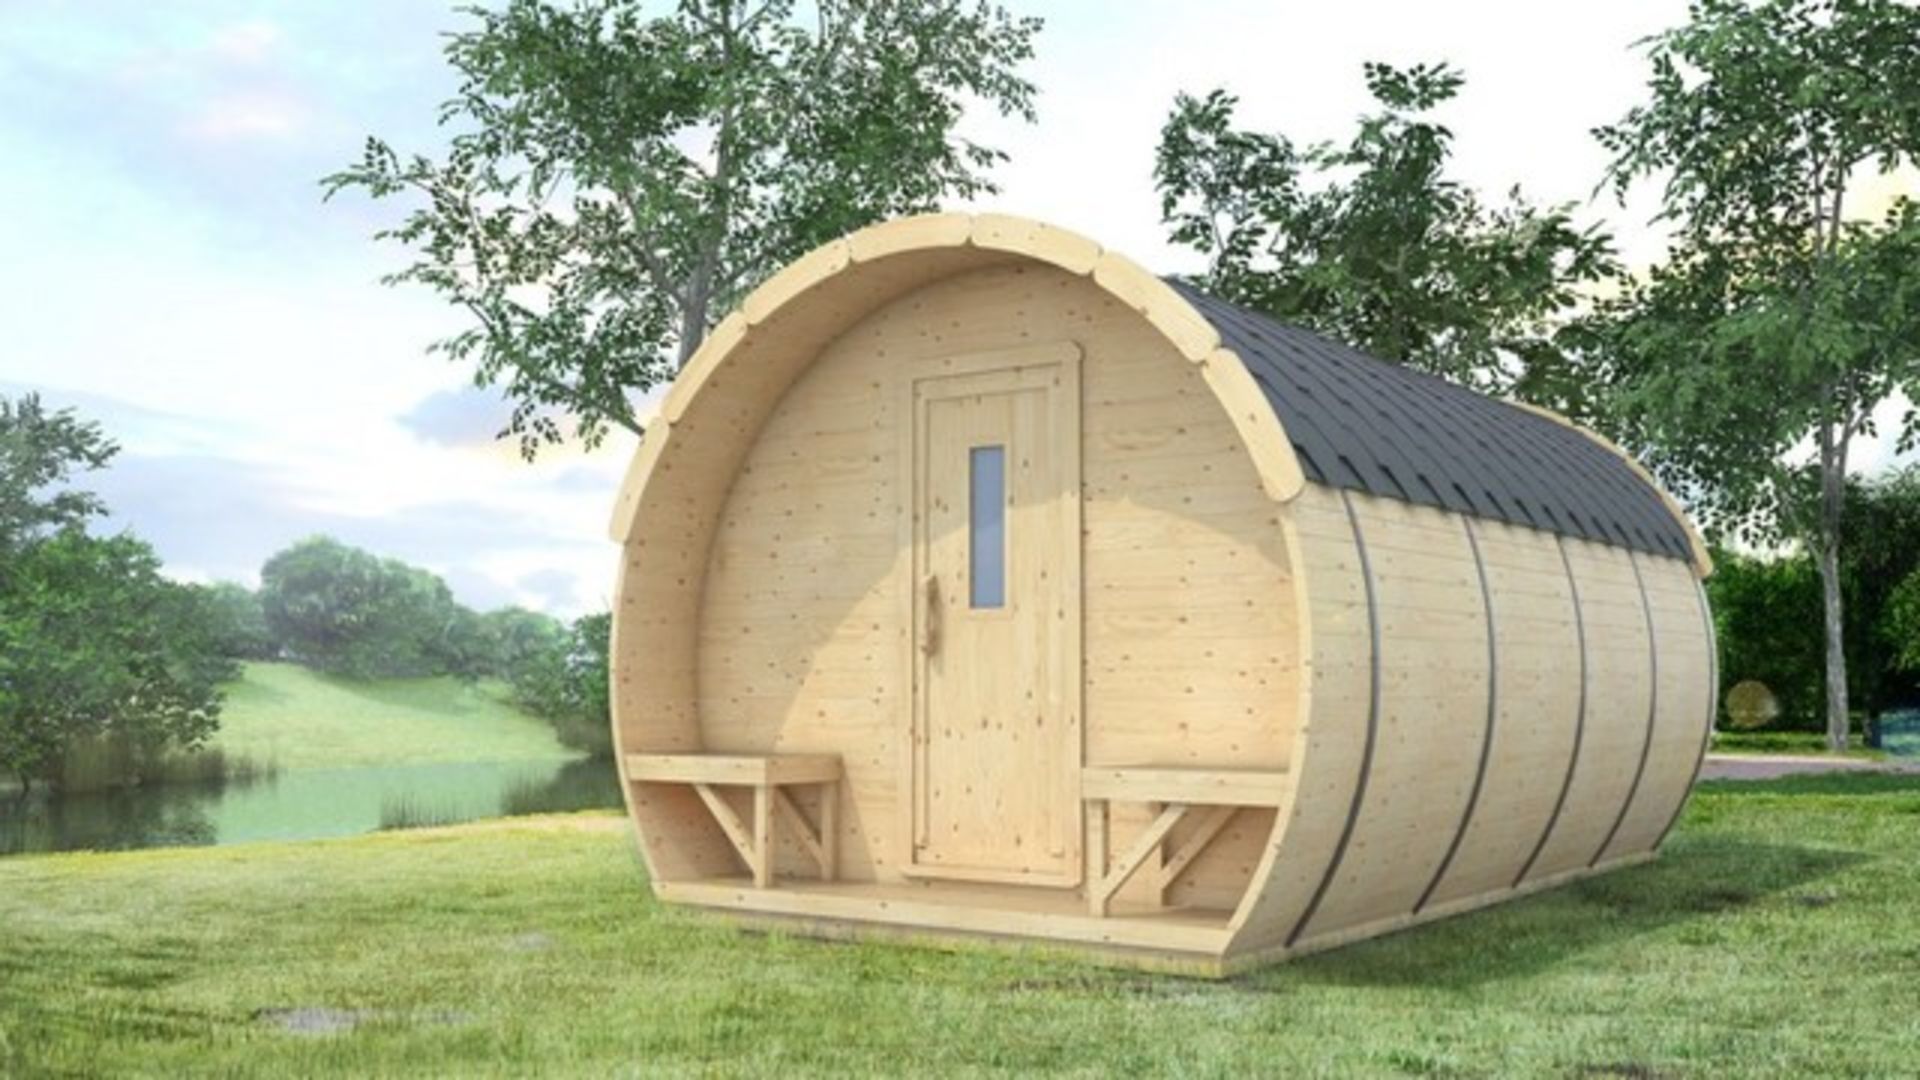 V Brand New 9.5M sq Ice-Viking Barrel- Two Rooms (2x2.3m Sleeping Room and Entrance room with